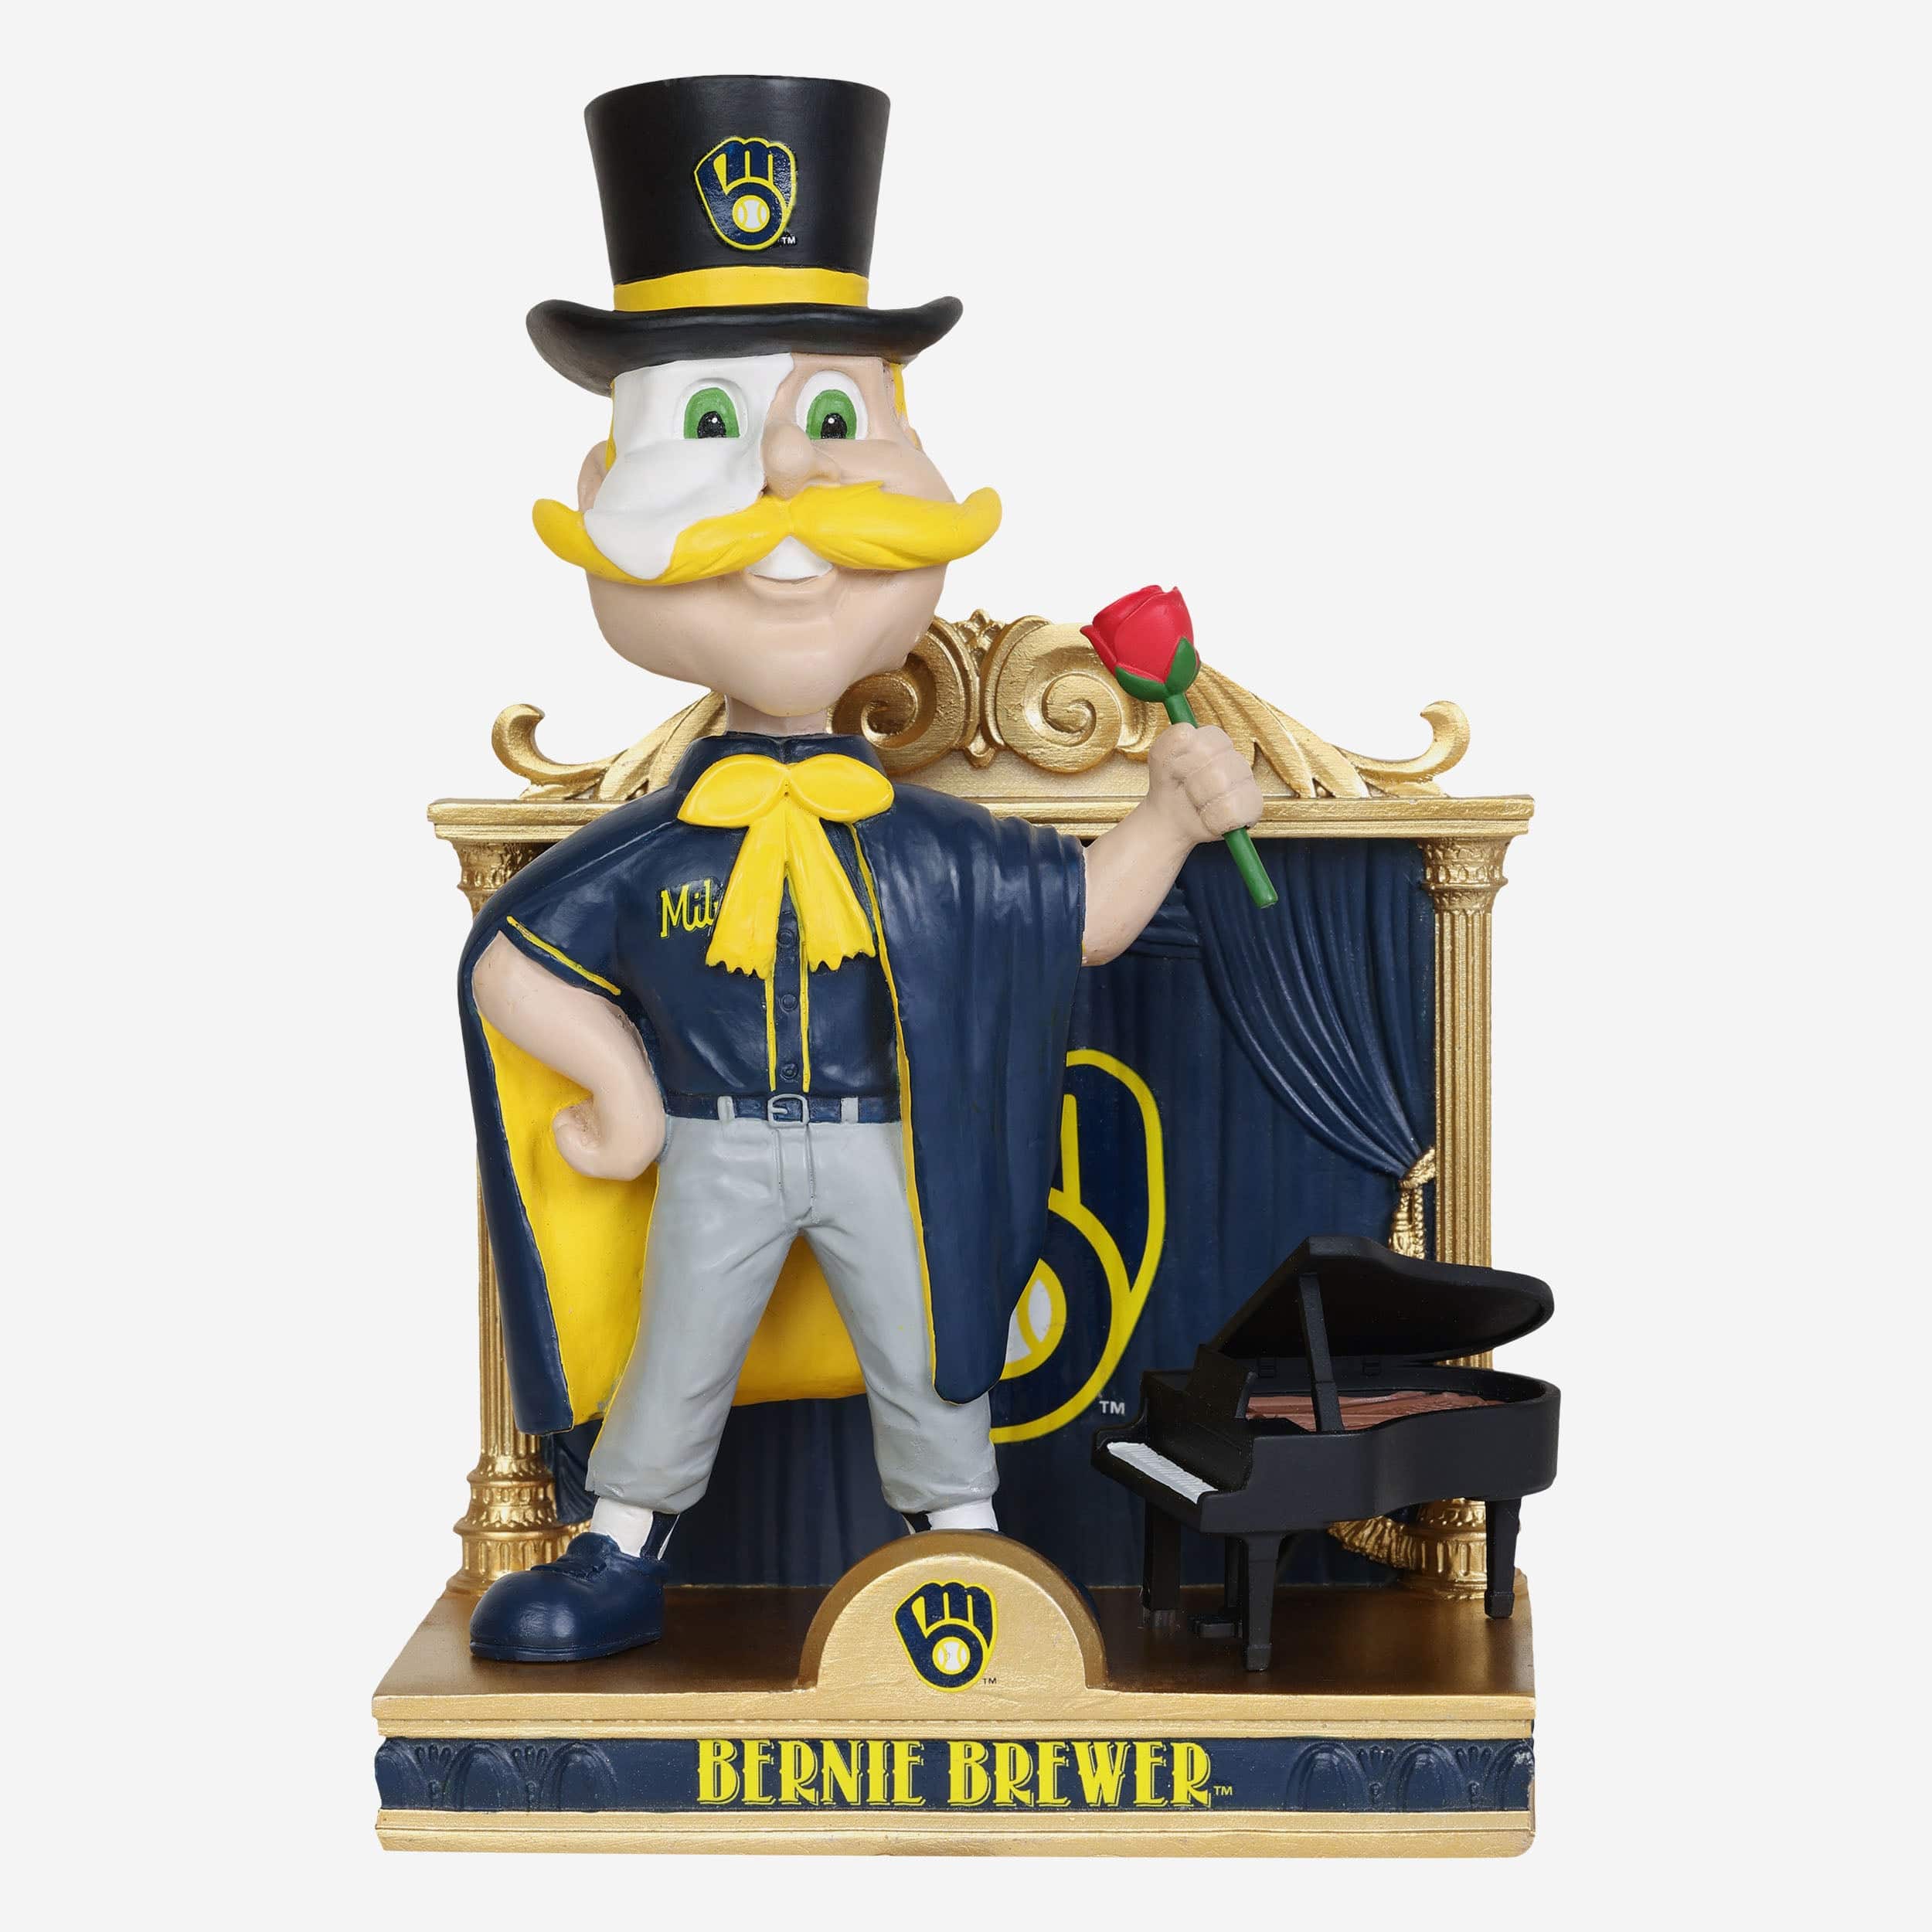 Bernie Brewer Milwaukee Brewers Magnetic Stadium Base Mascot Bobblehead Officially Licensed by MLB